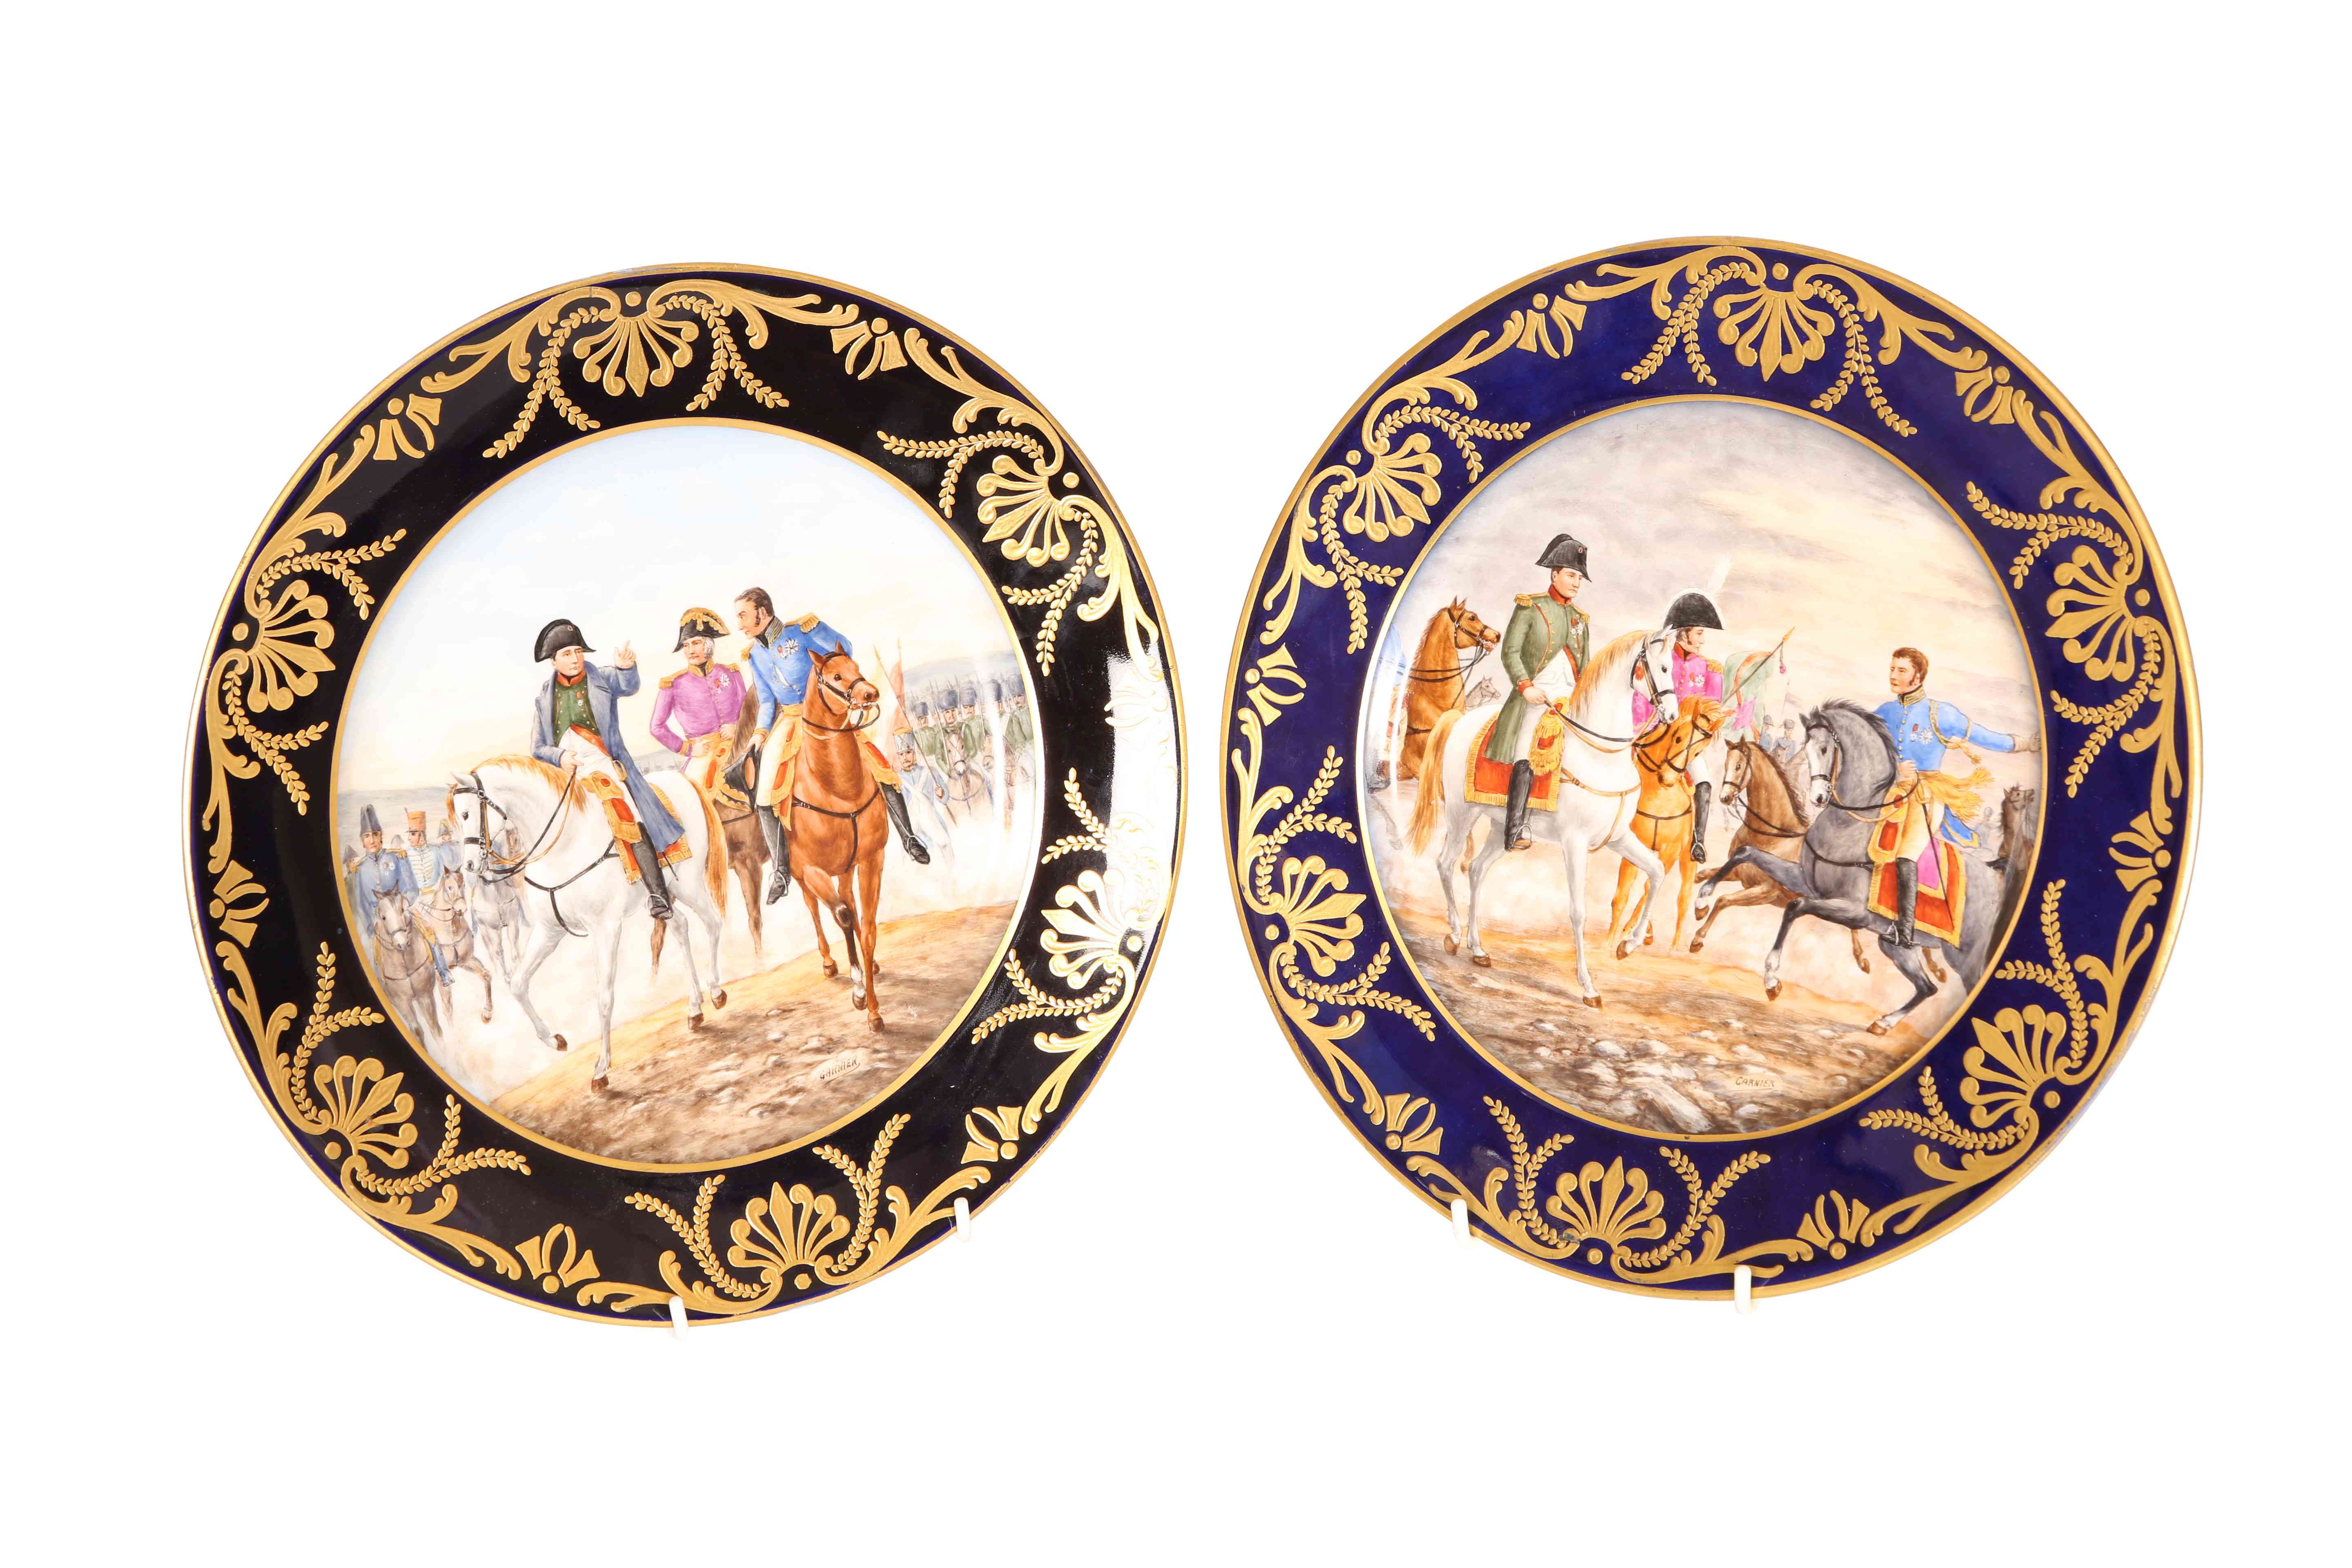 A NEAR PAIR OF CONTINENTAL PAINTED AND GILDED PORCELAIN PLATES, each signed GARNIER,